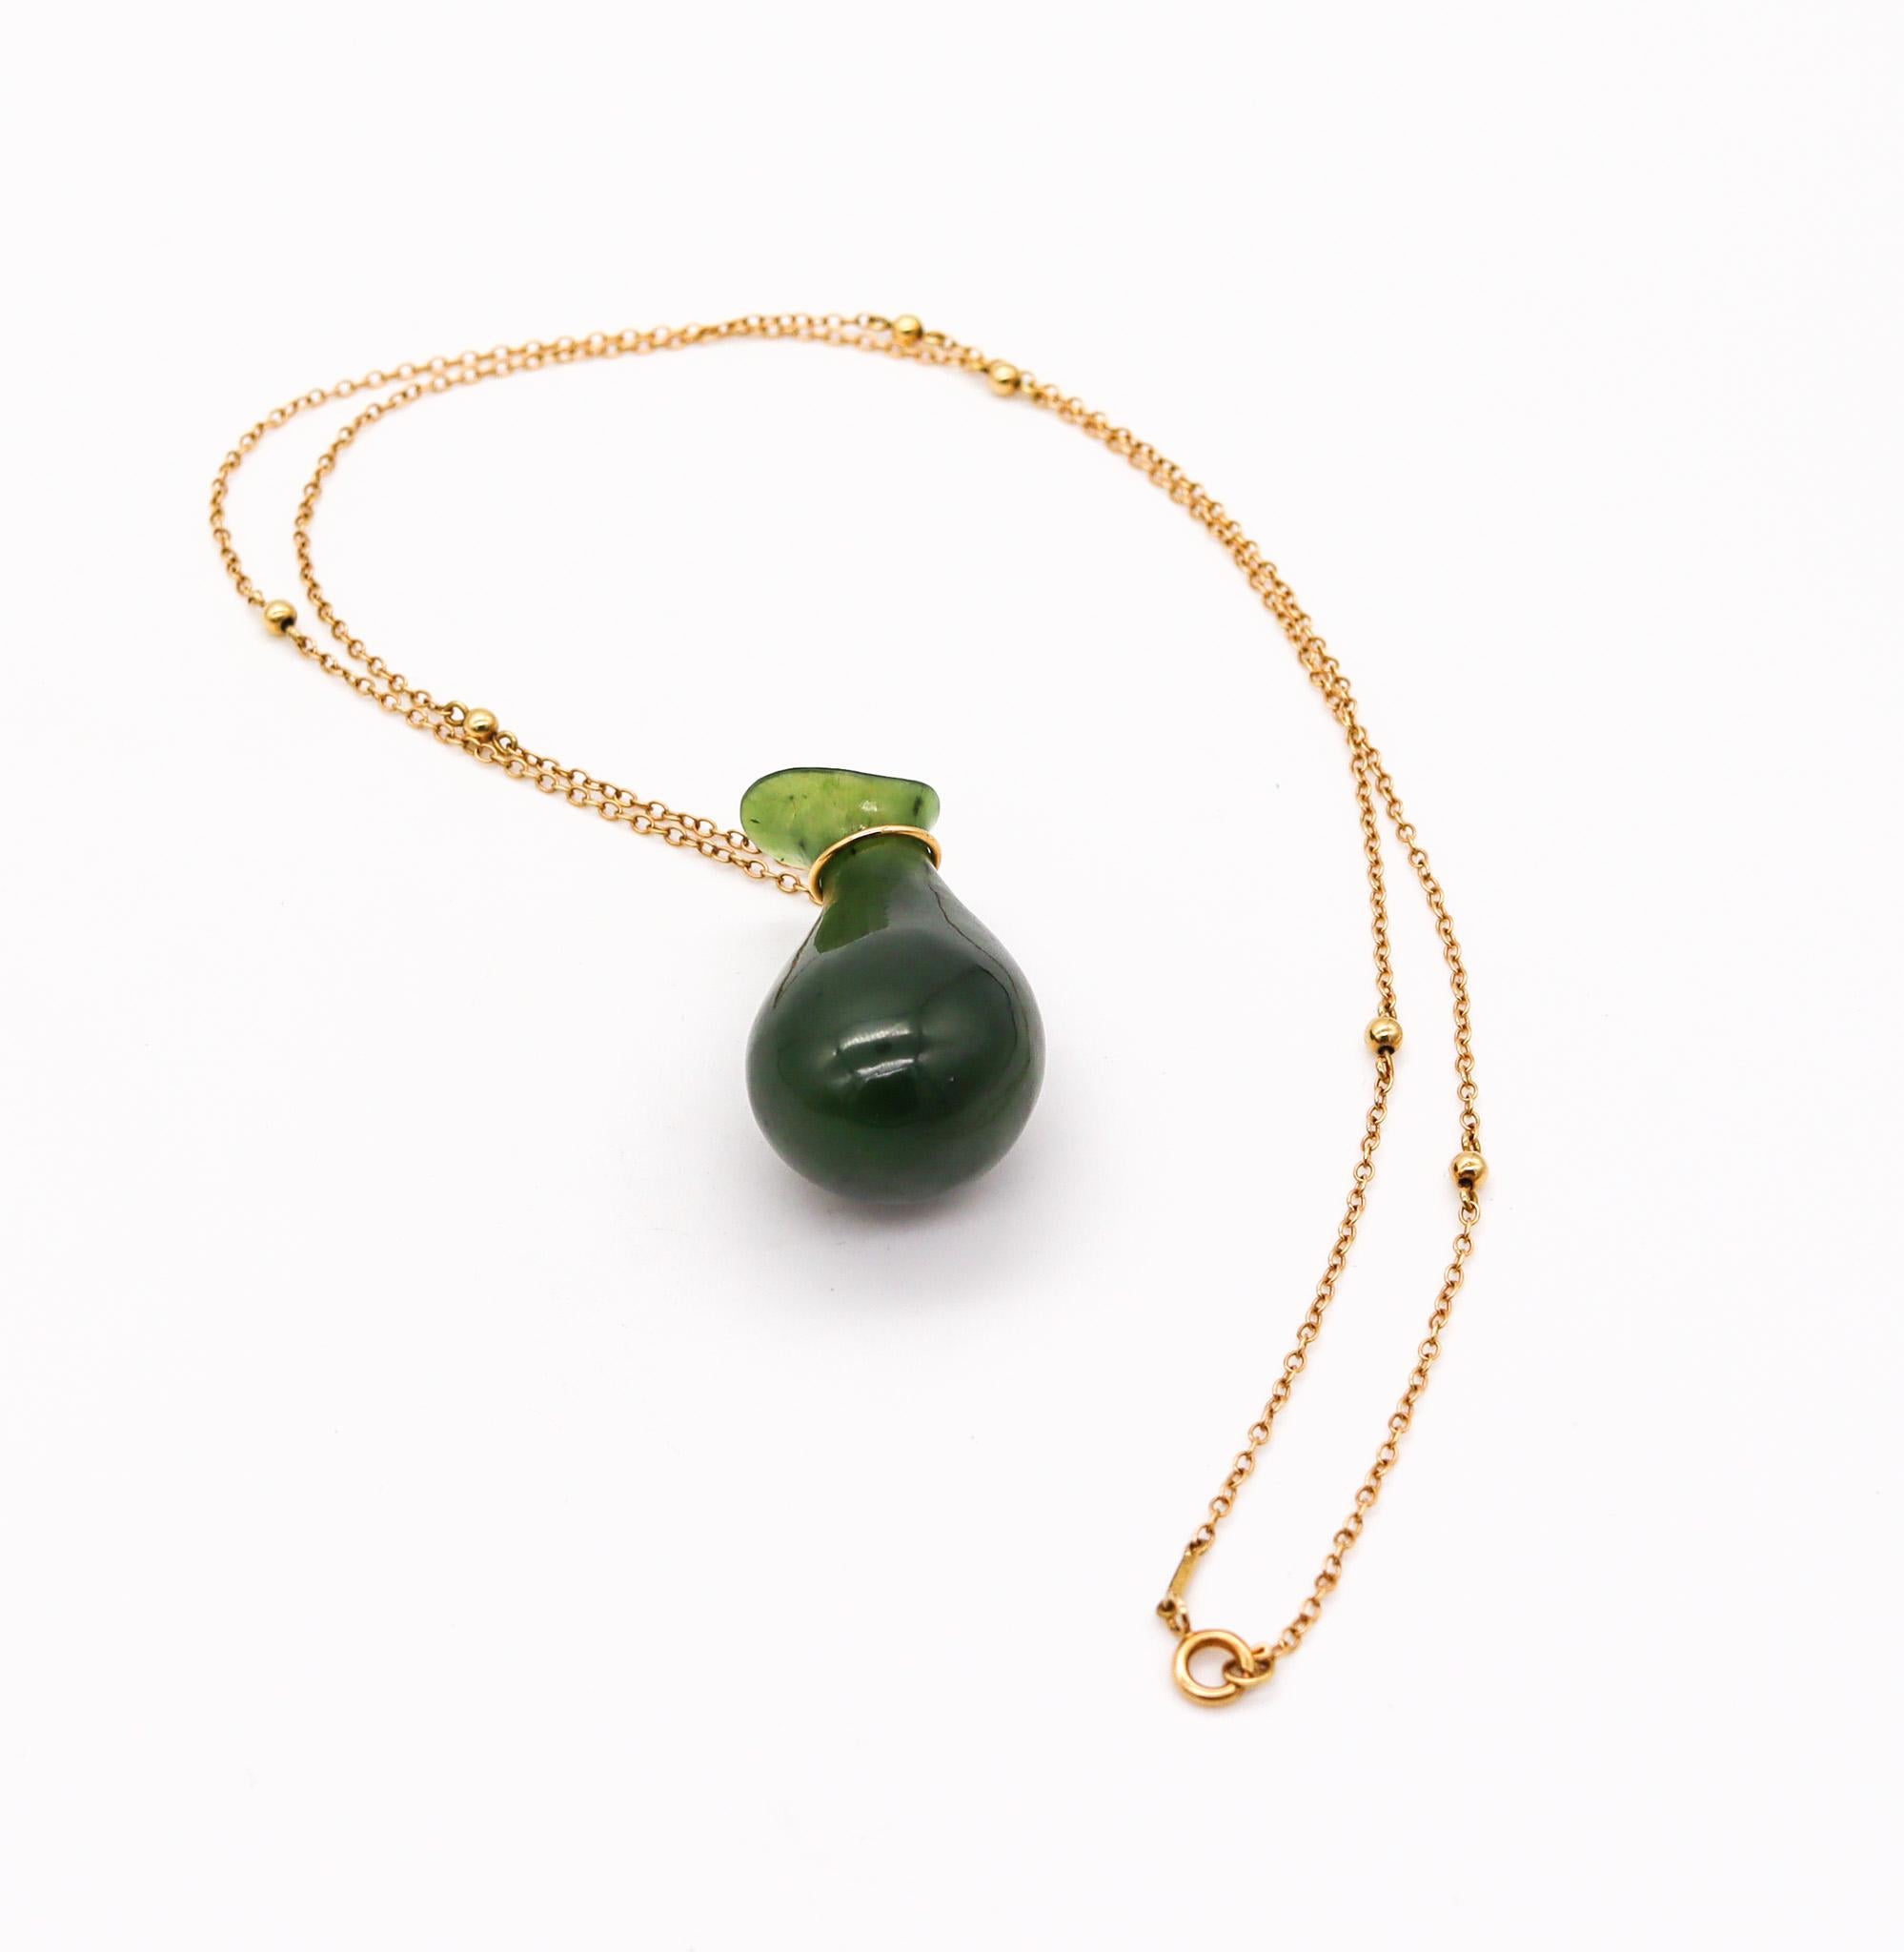 A jug jar necklace designed by Elsa Peretti (1940-2021) for Tiffany & Co. 

Very rare vintage piece, created at the Tiffany Studios in New York City by Elsa Peretti, back in the 1978. This iconic model was one of Peretti's first designs for Tiffany